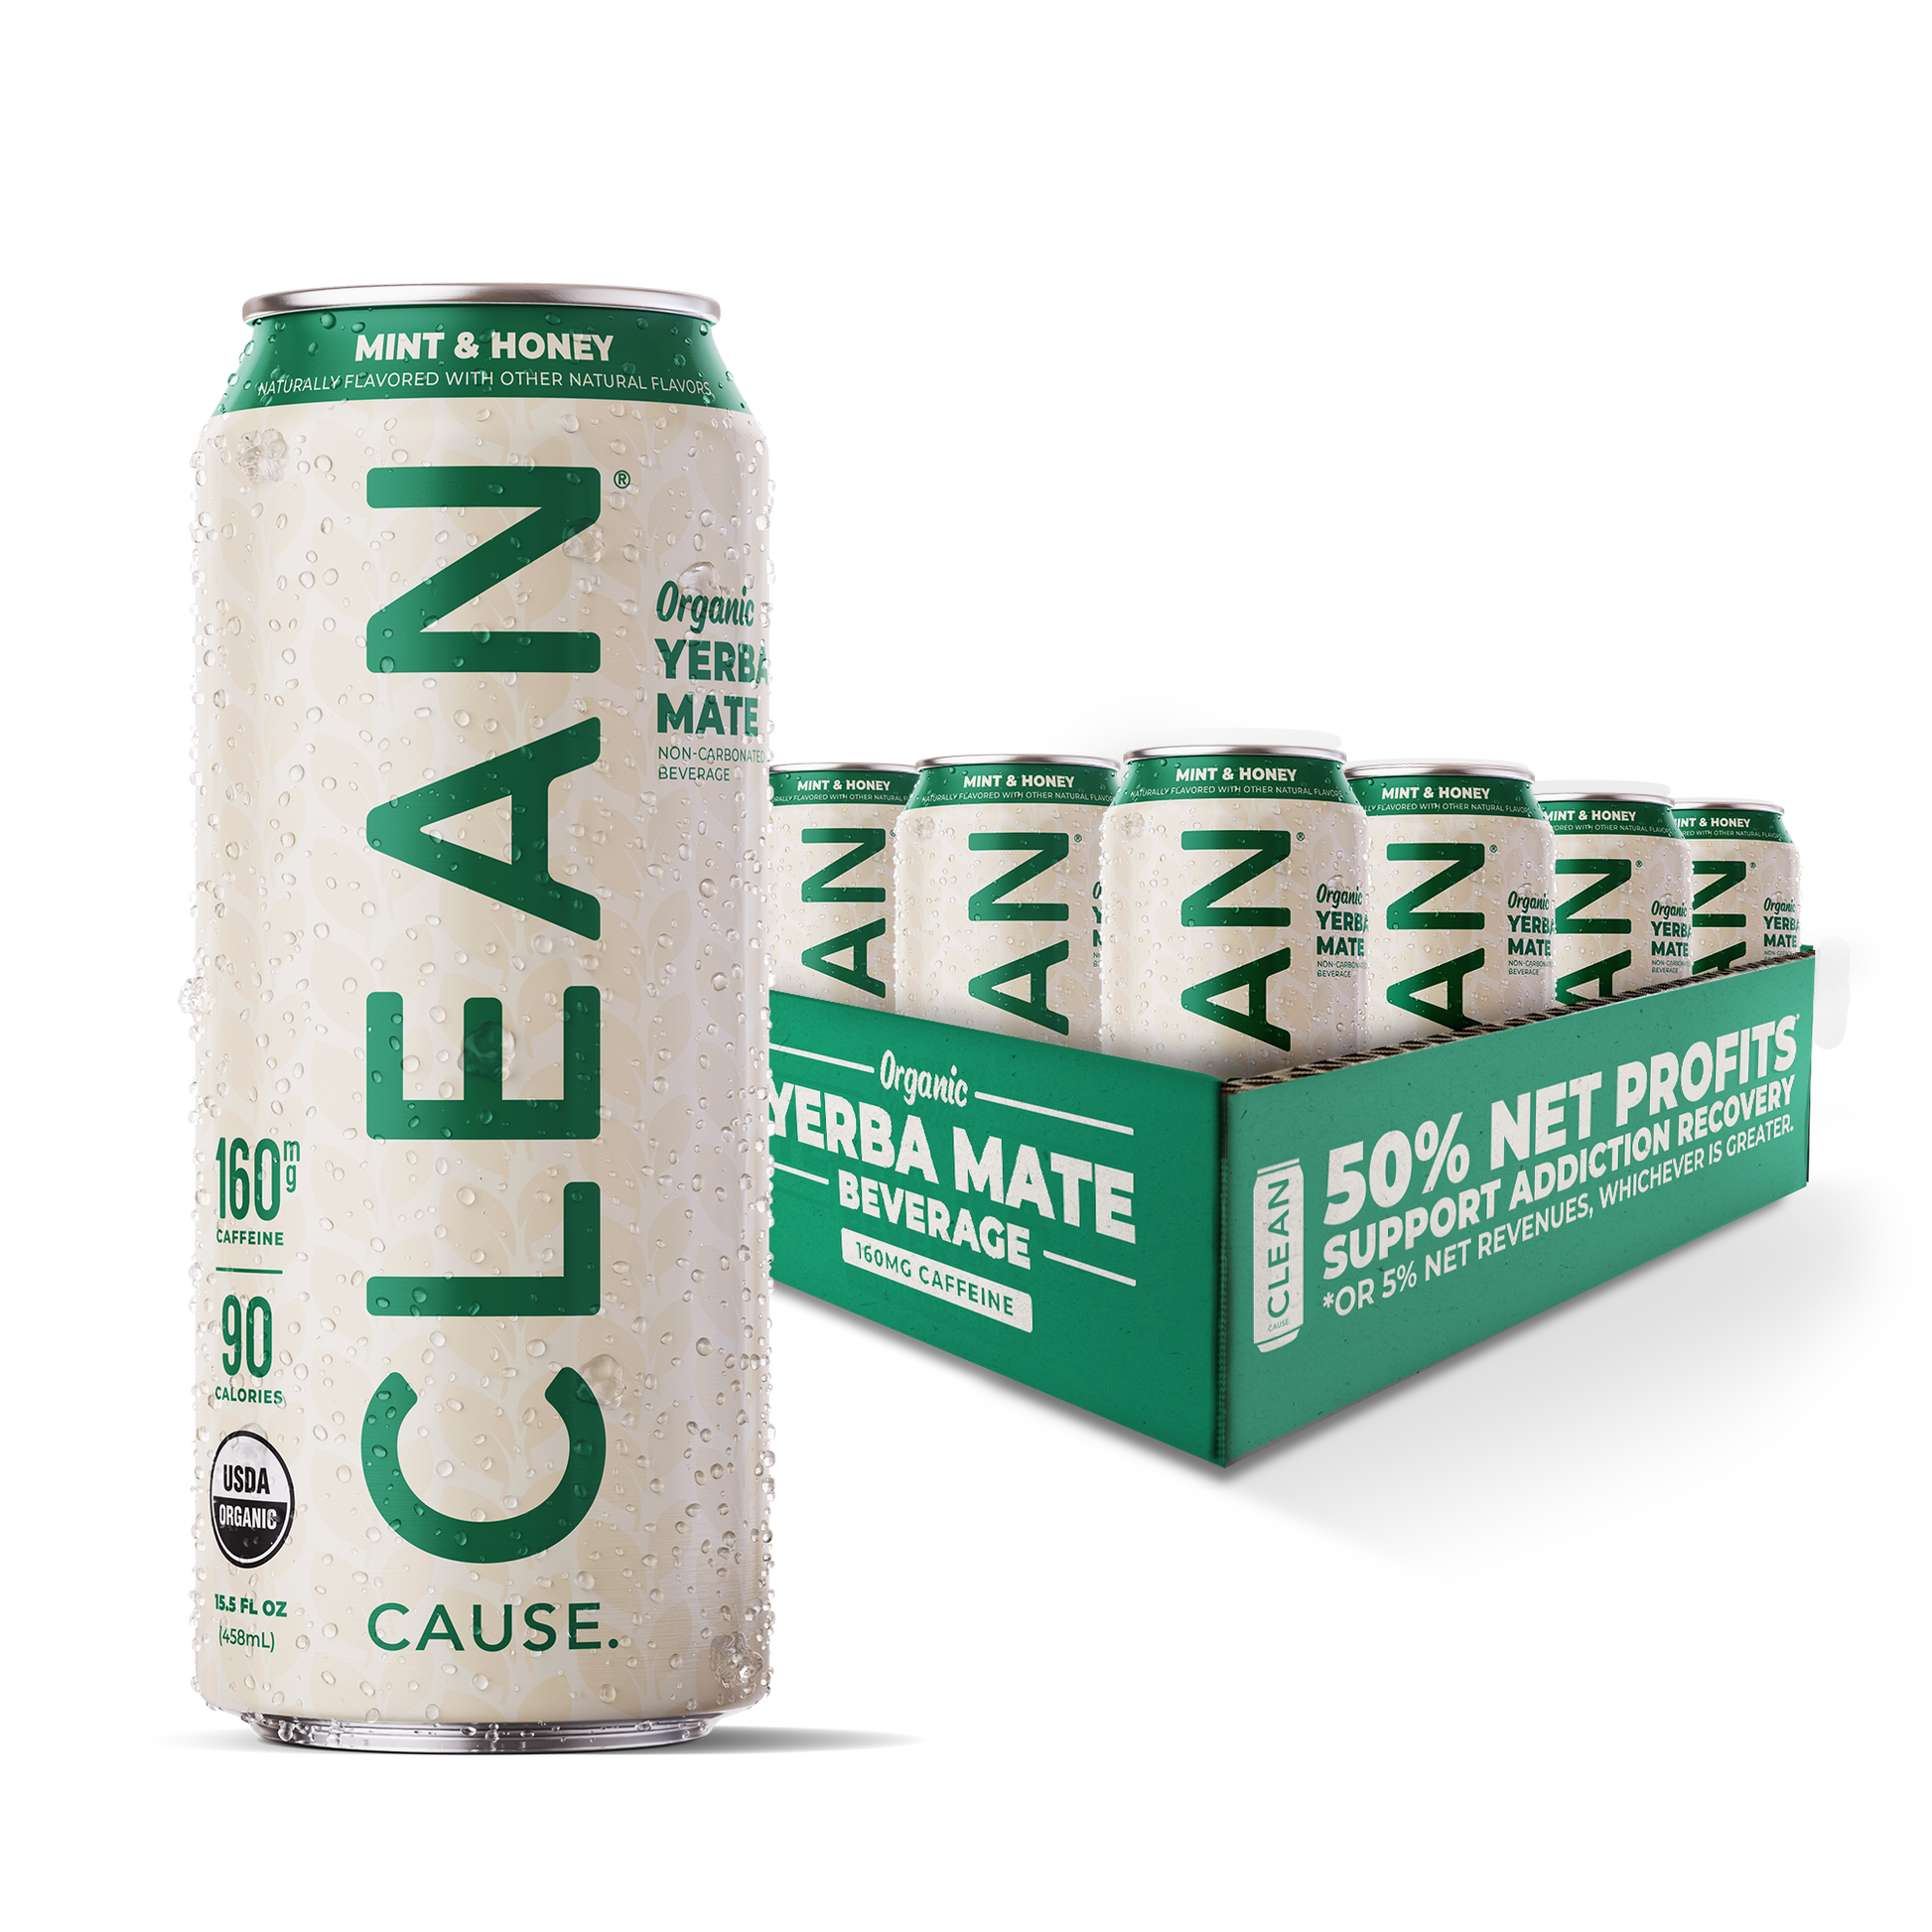 Mint and Honey singular can in front of a 12-pack of the same flavor. 